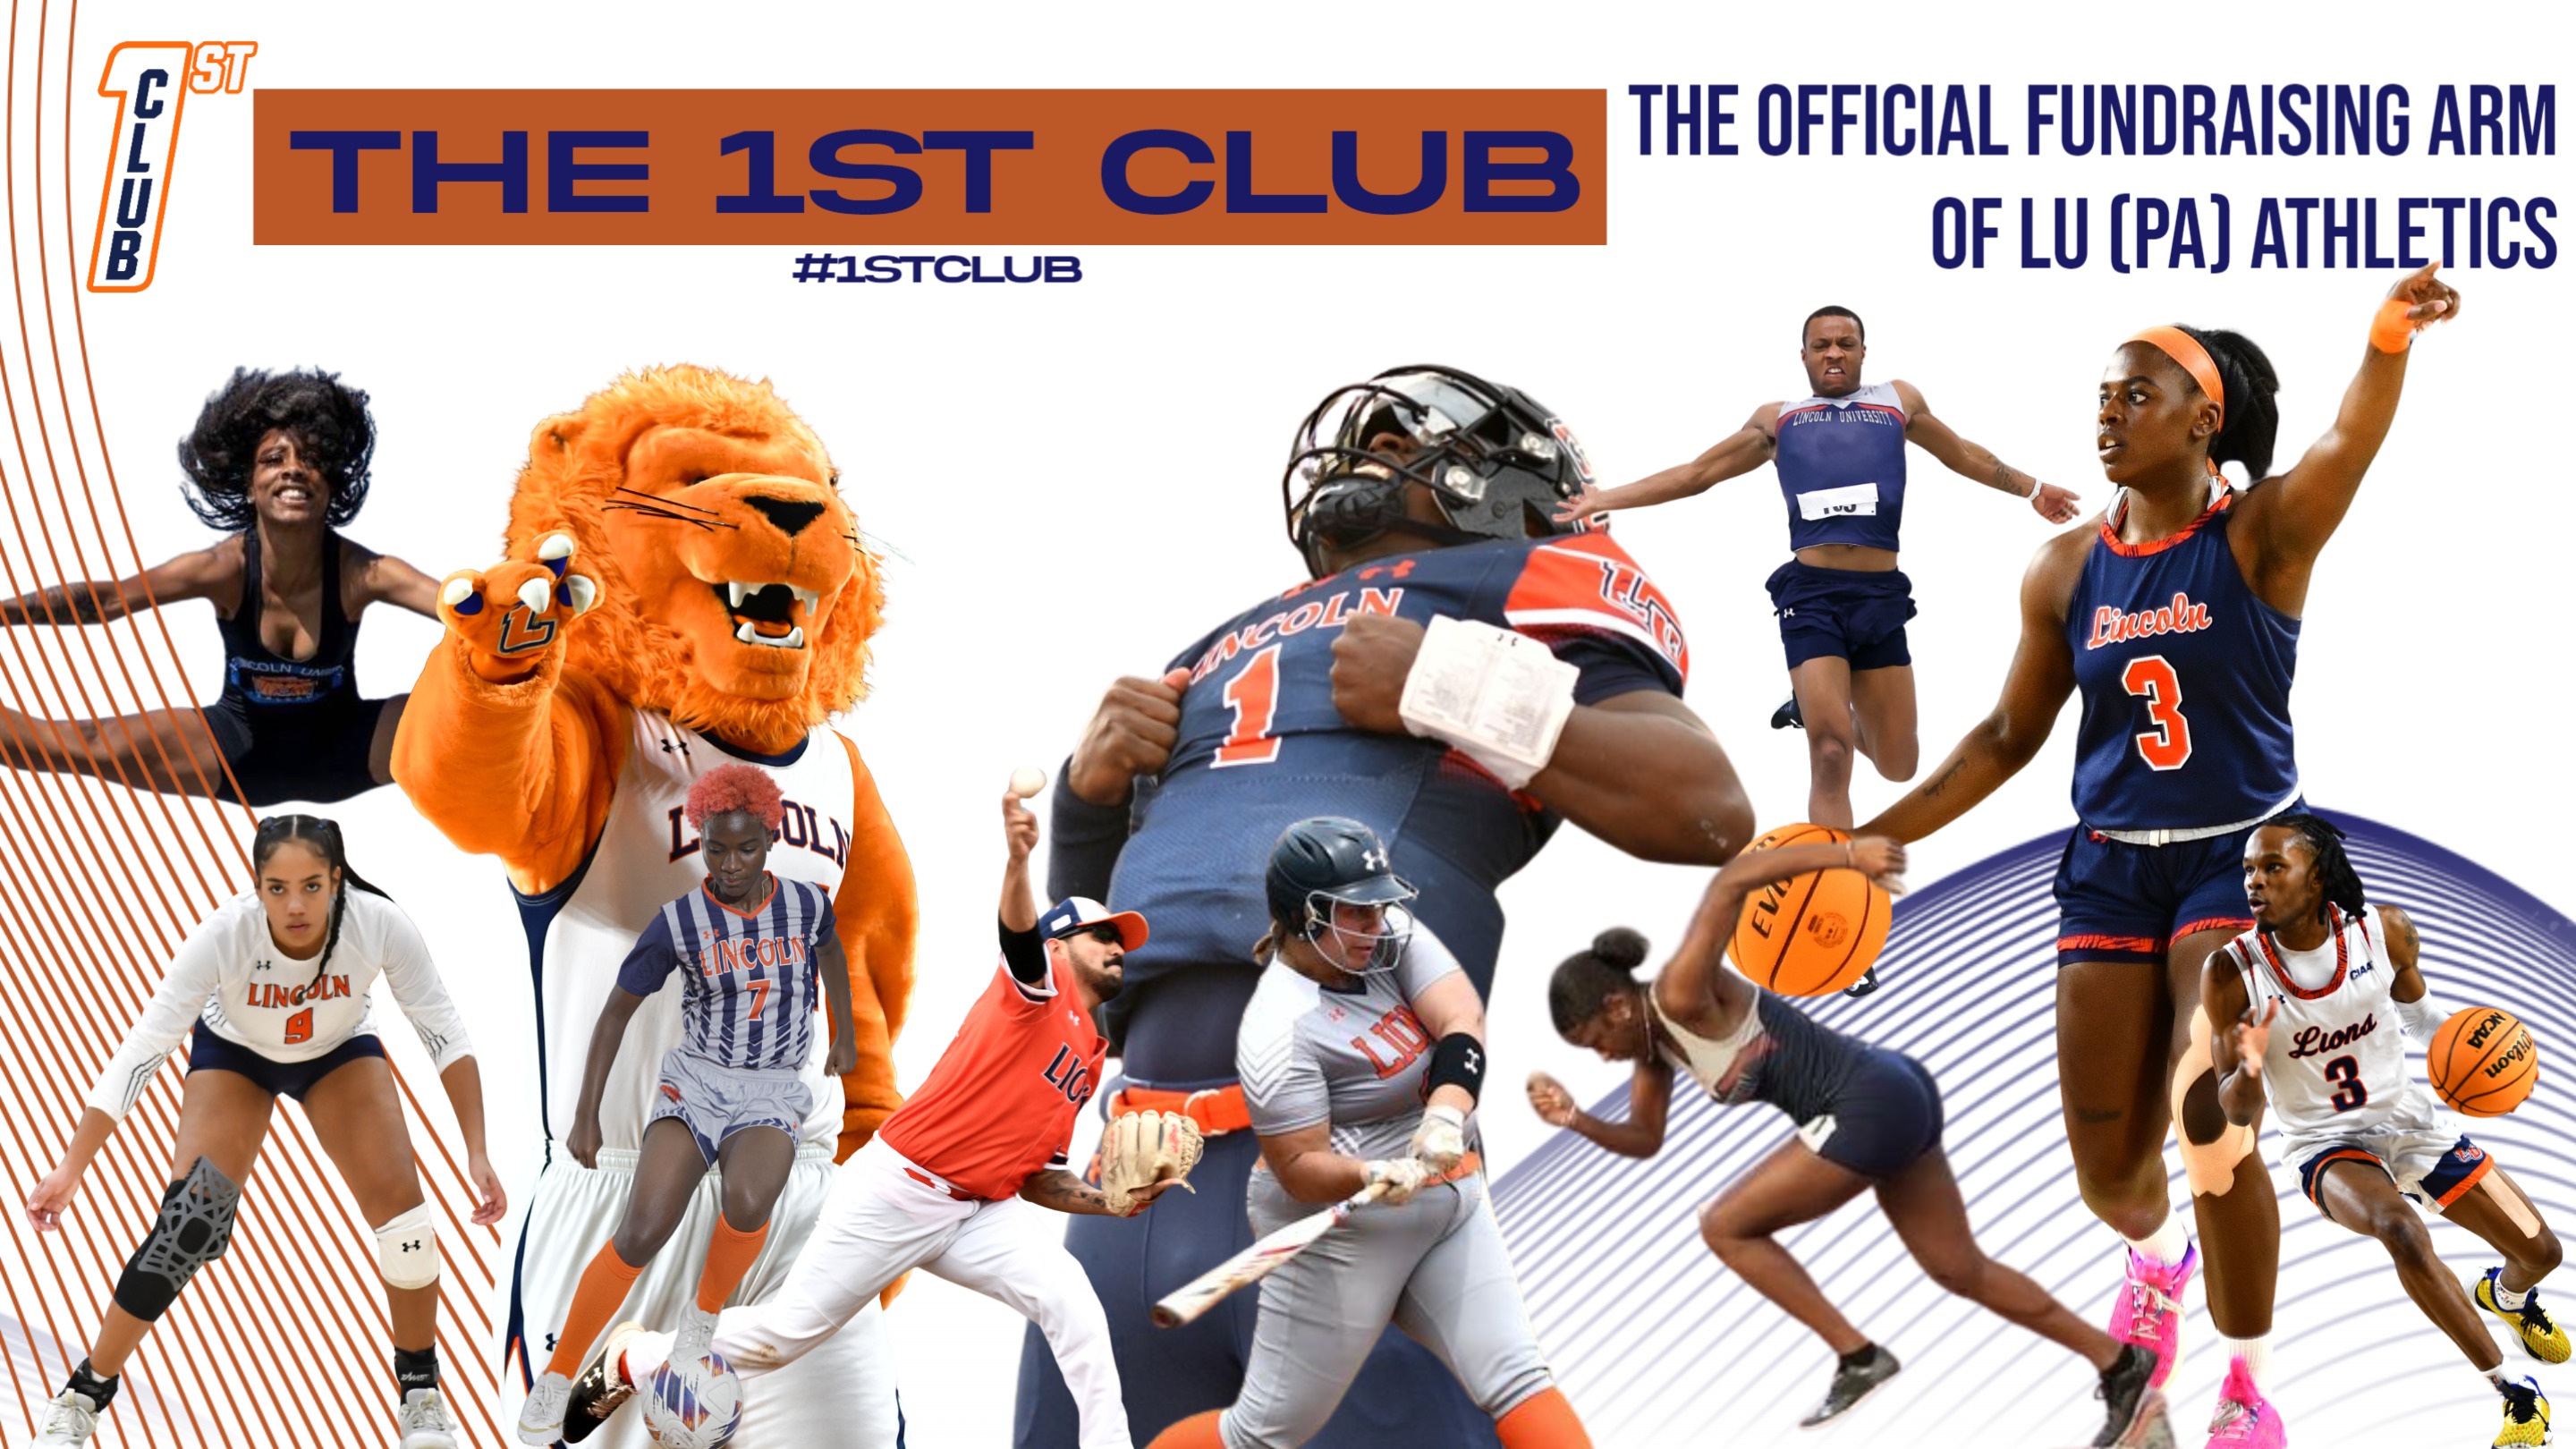 1st Club Flyer with Lincoln Athletes photo'd